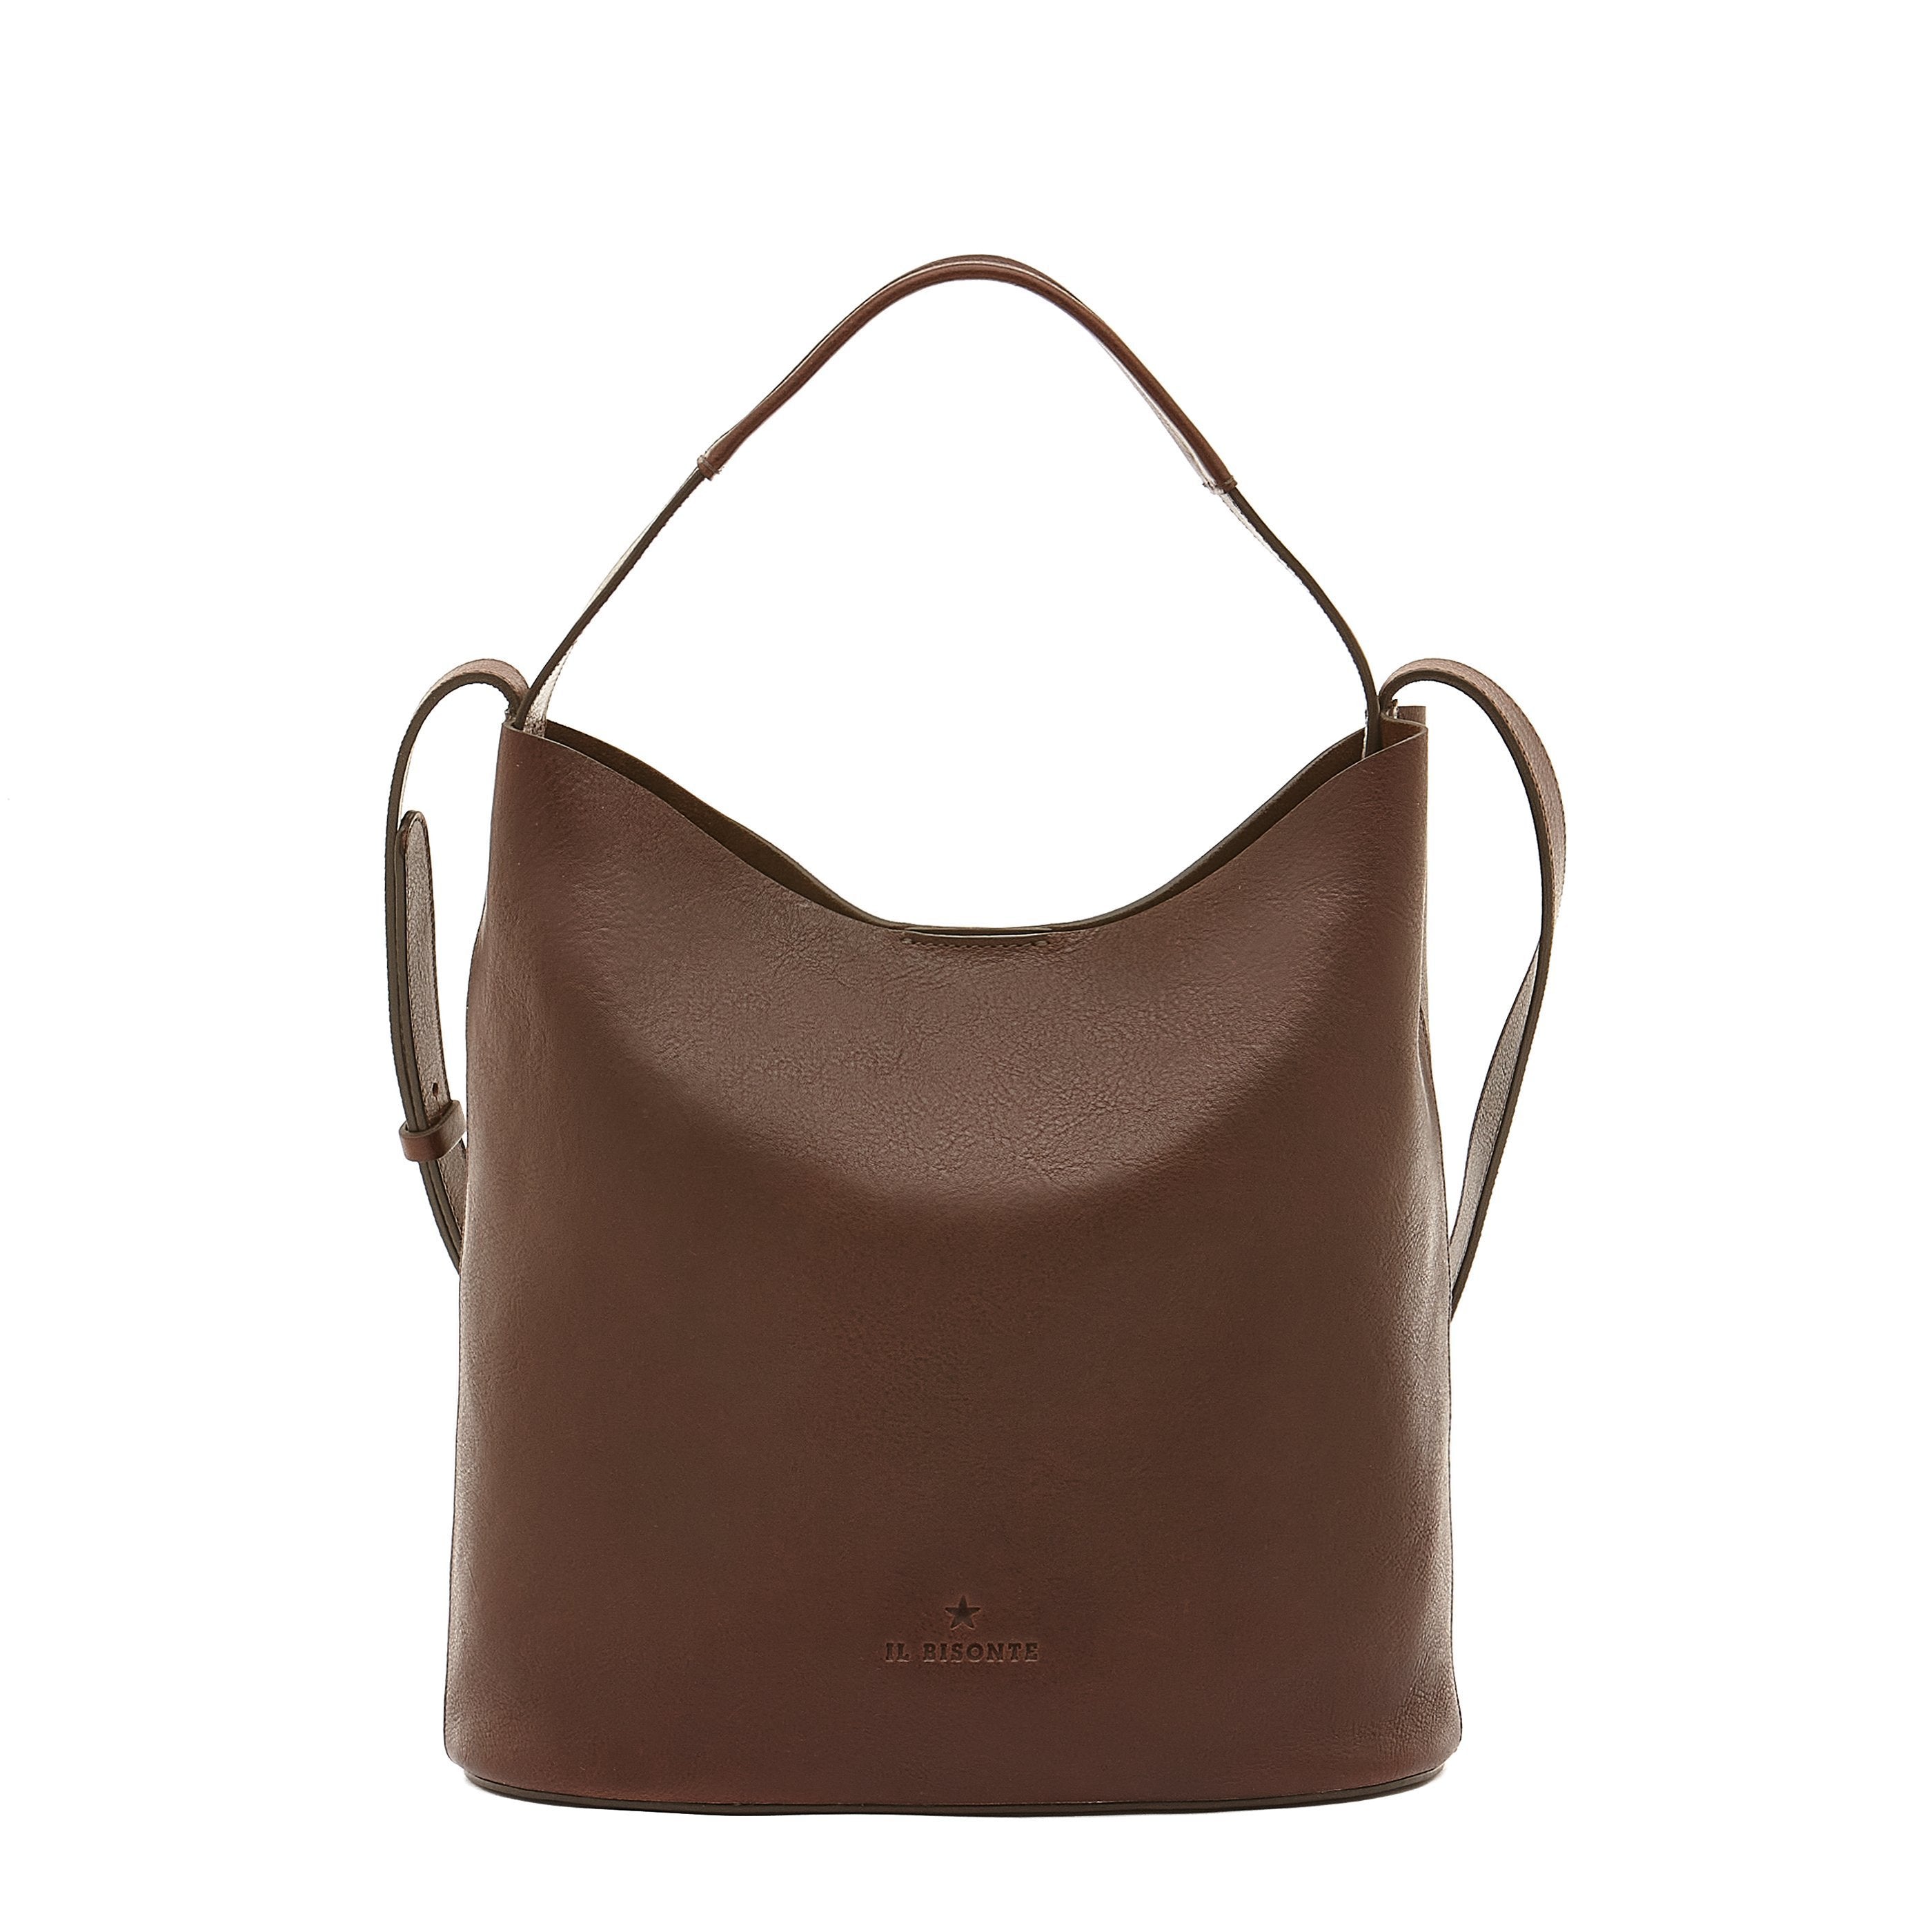 Le laudi | Women's bucket bag in vintage leather color coffee